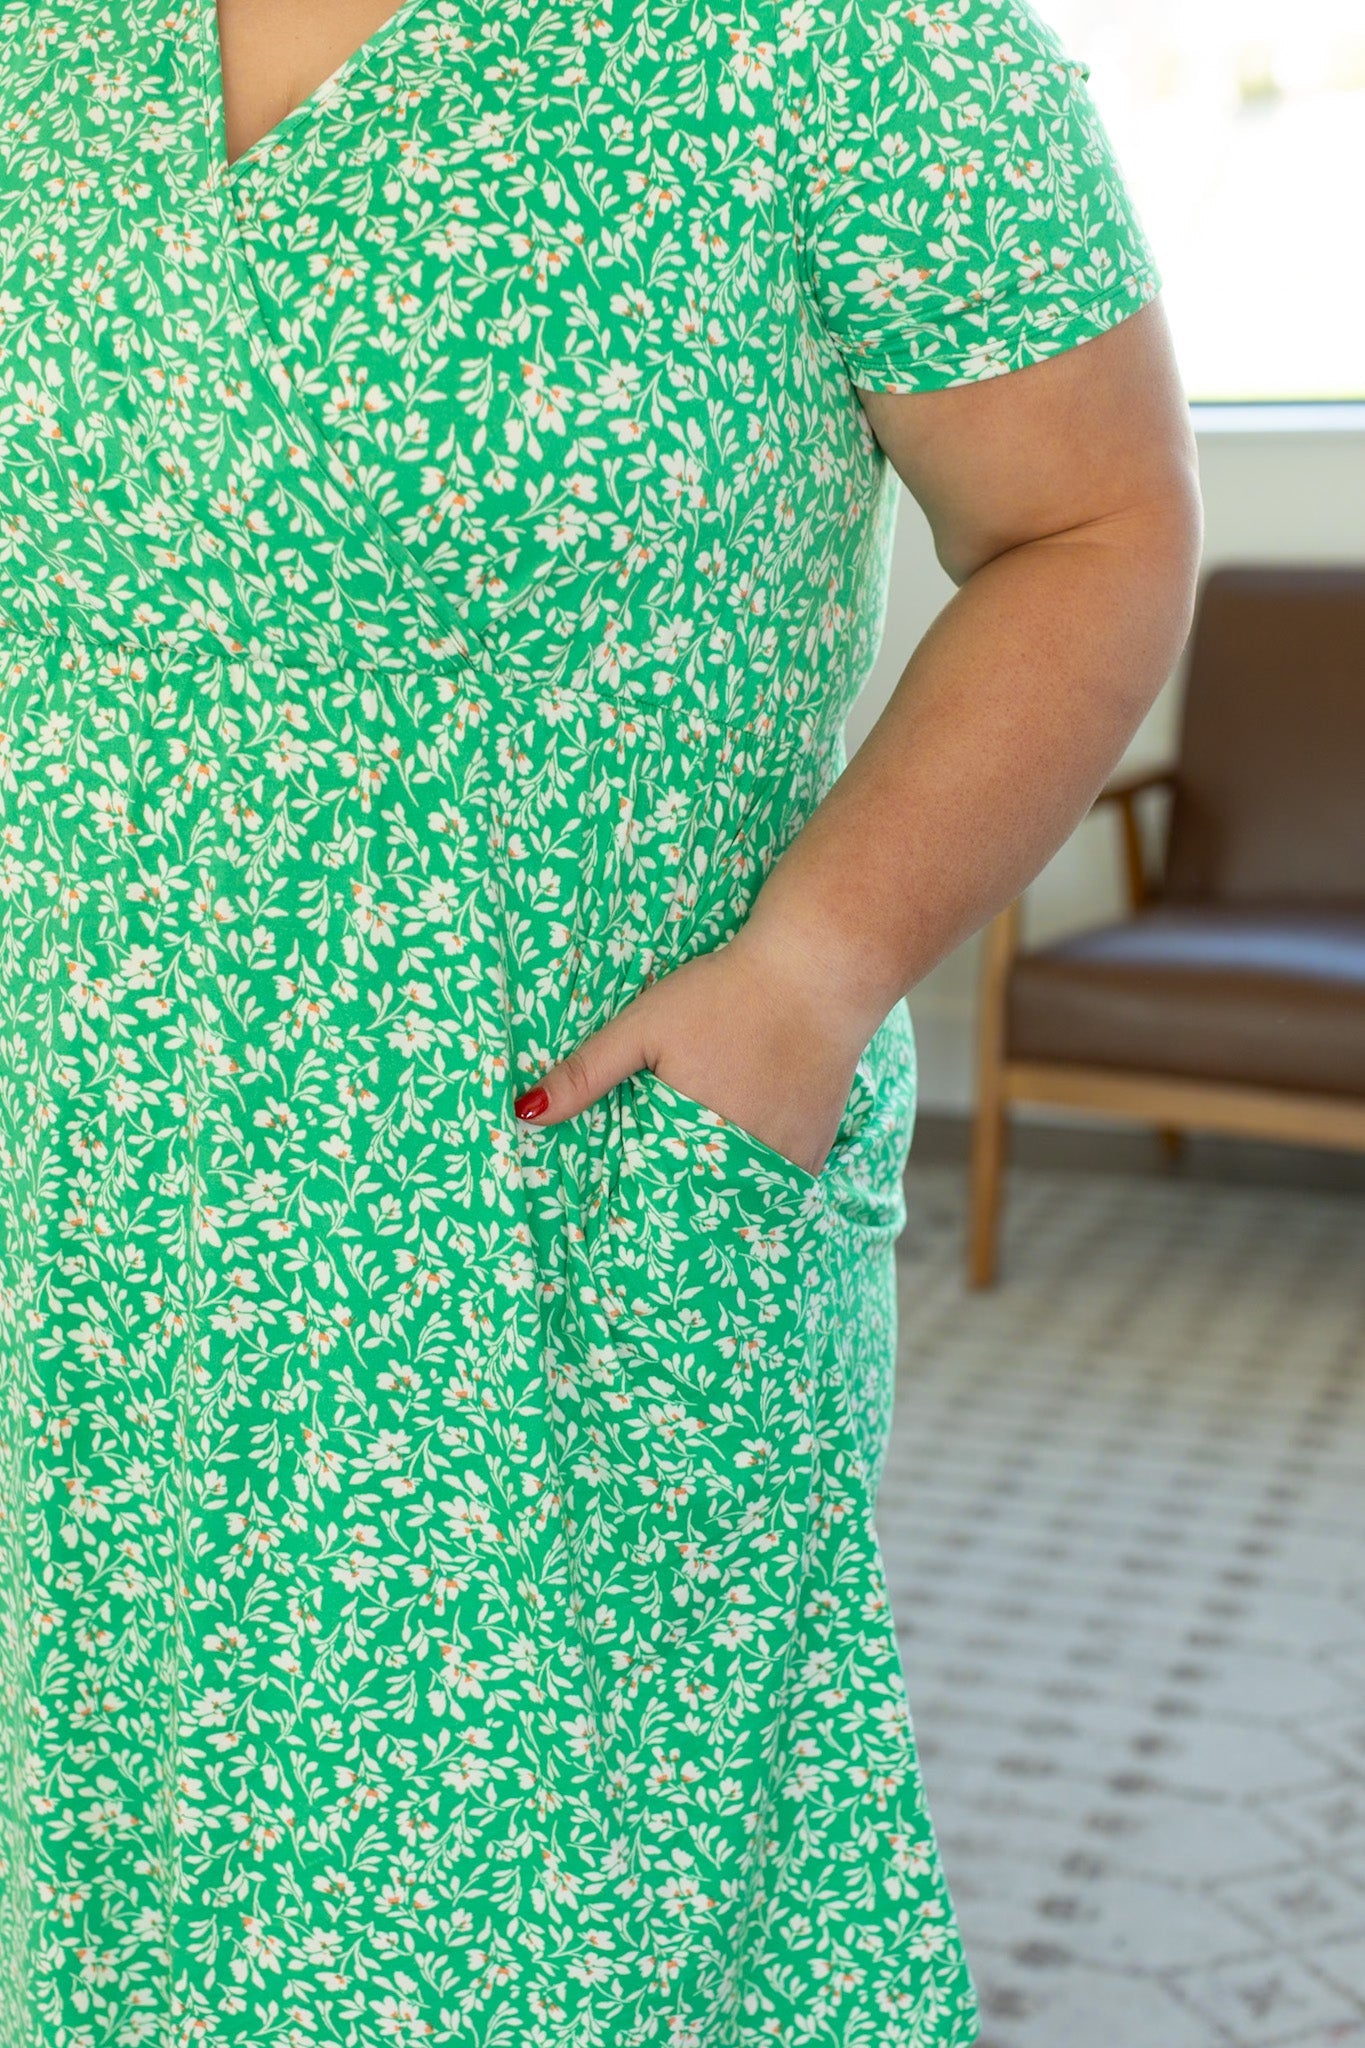 IN STOCK Tinley Dress - Green Floral FINAL SALE